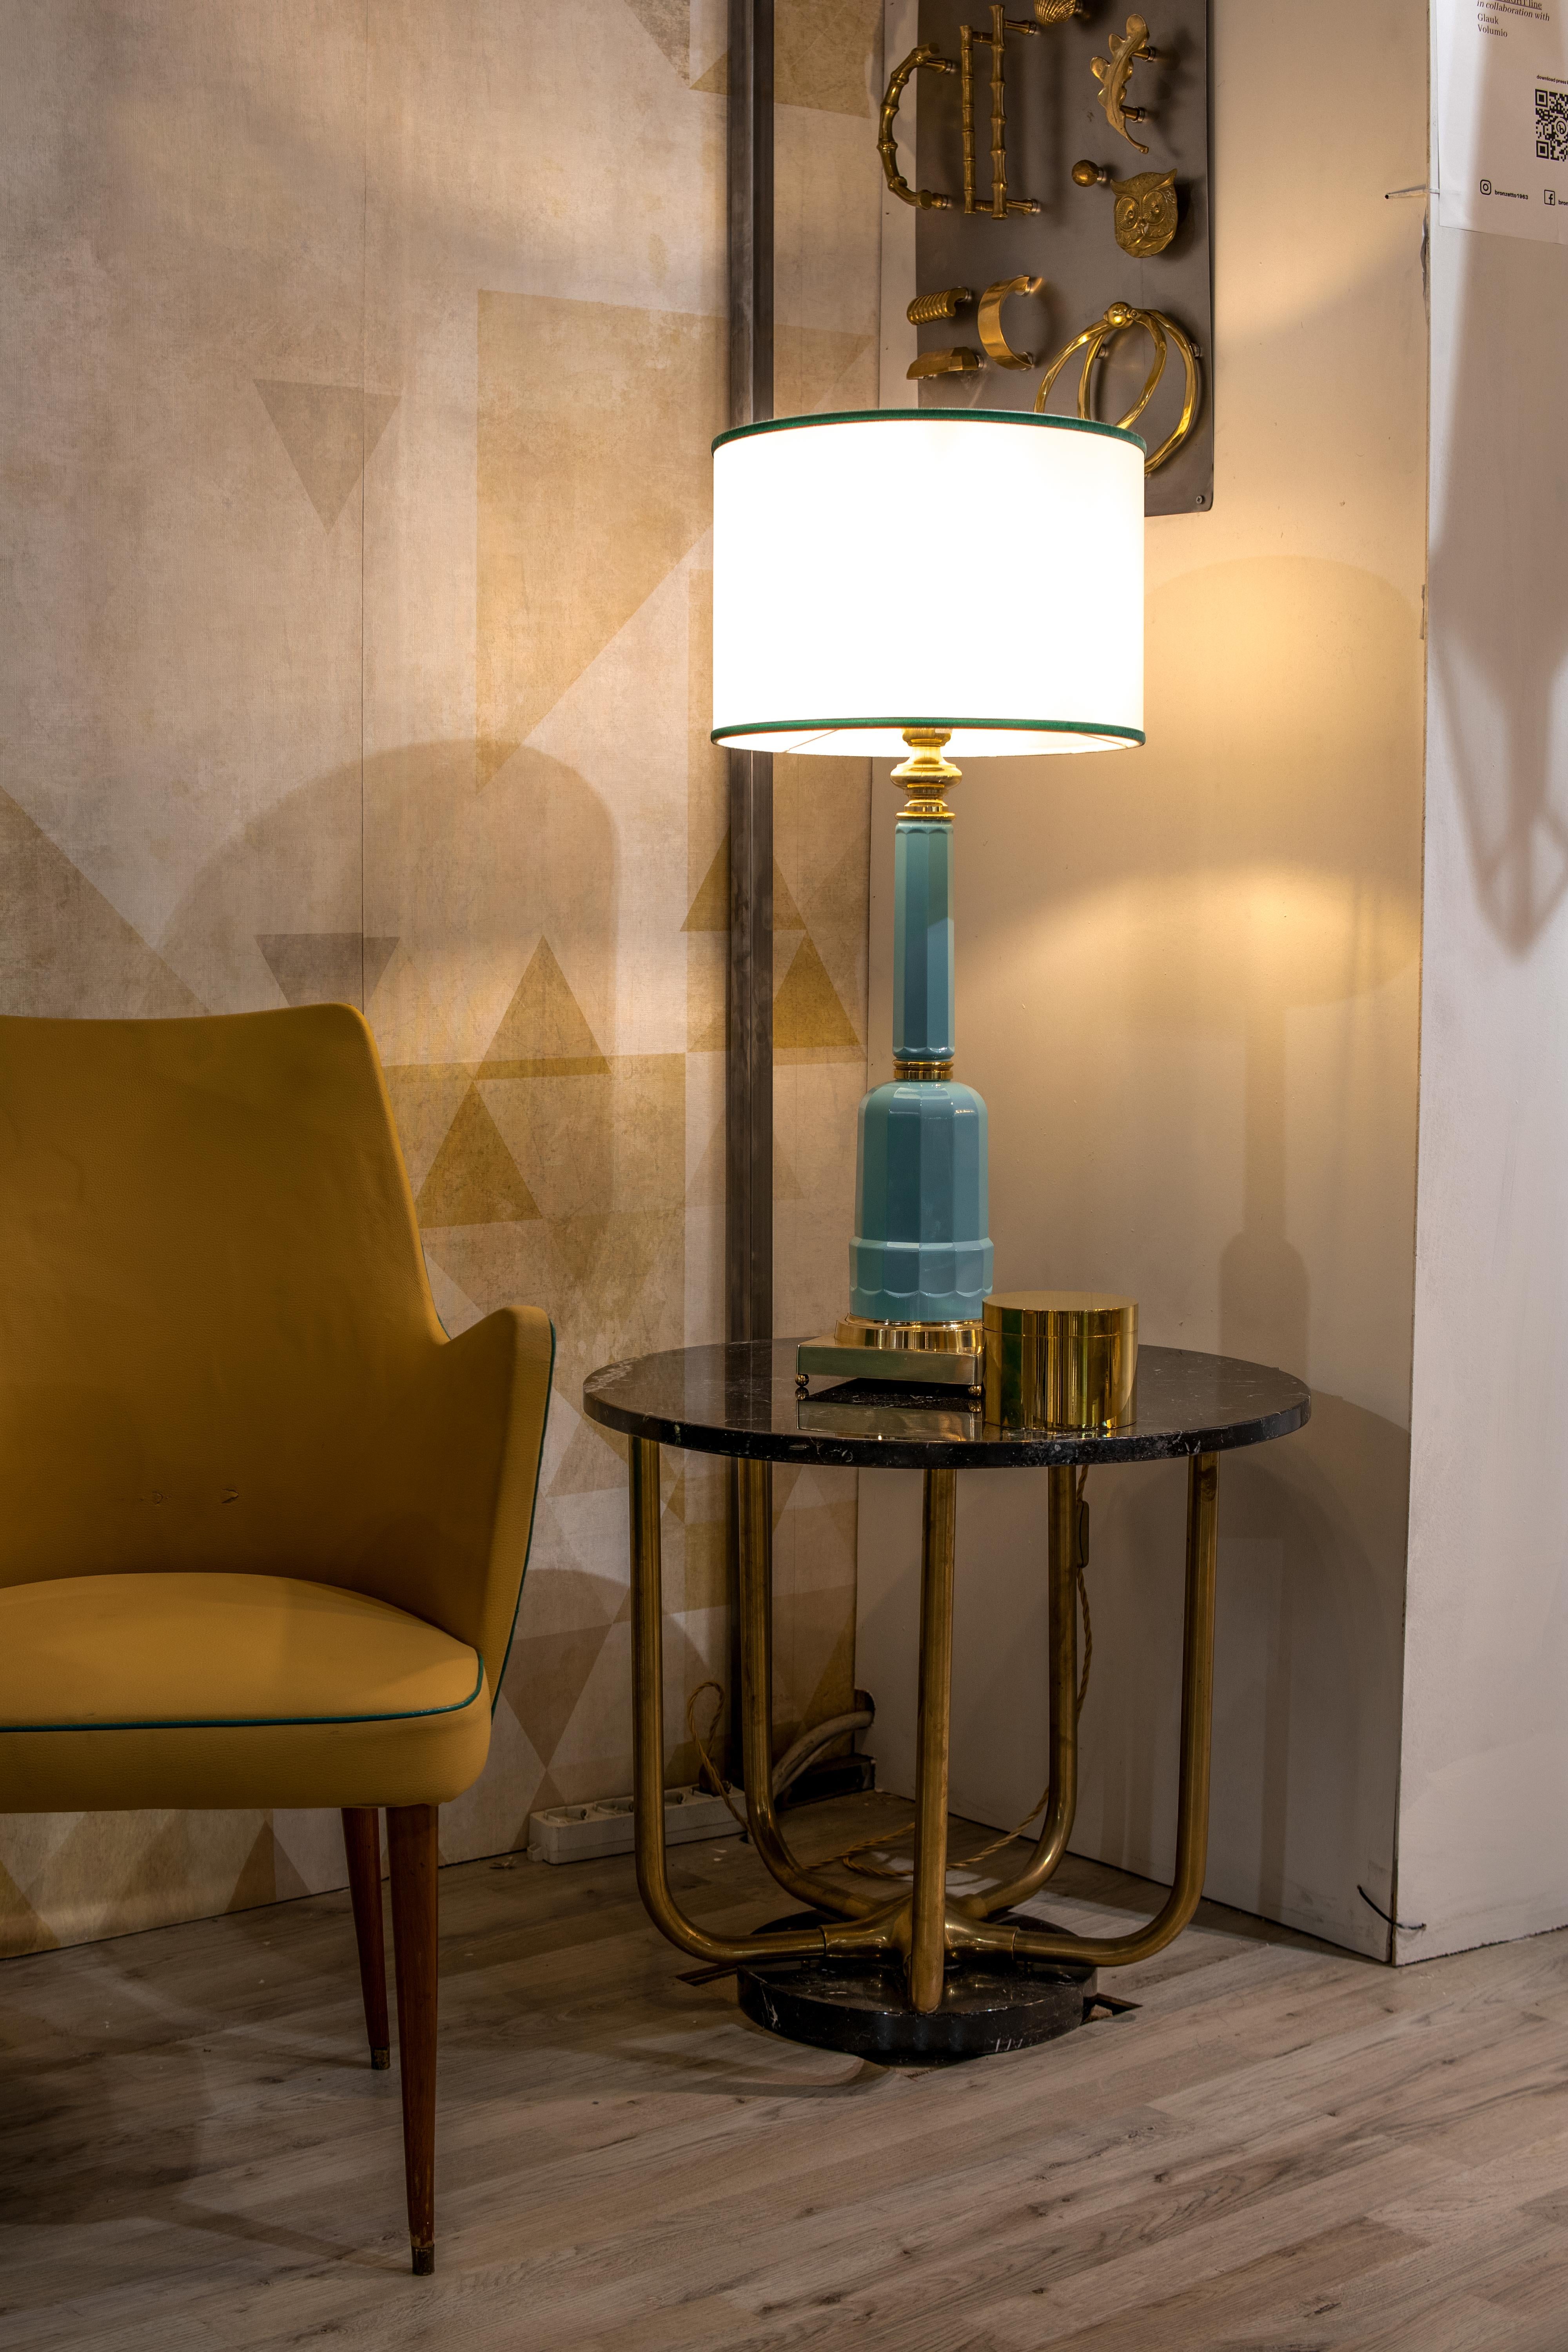 The Jacaranda table lamp is made of blown glass with the base and details in brass, natural finish, and fabric lampshade. The glass structure is obtained with the artisan technique of glass blowing inside a mold, usually of wood or carved metal, in